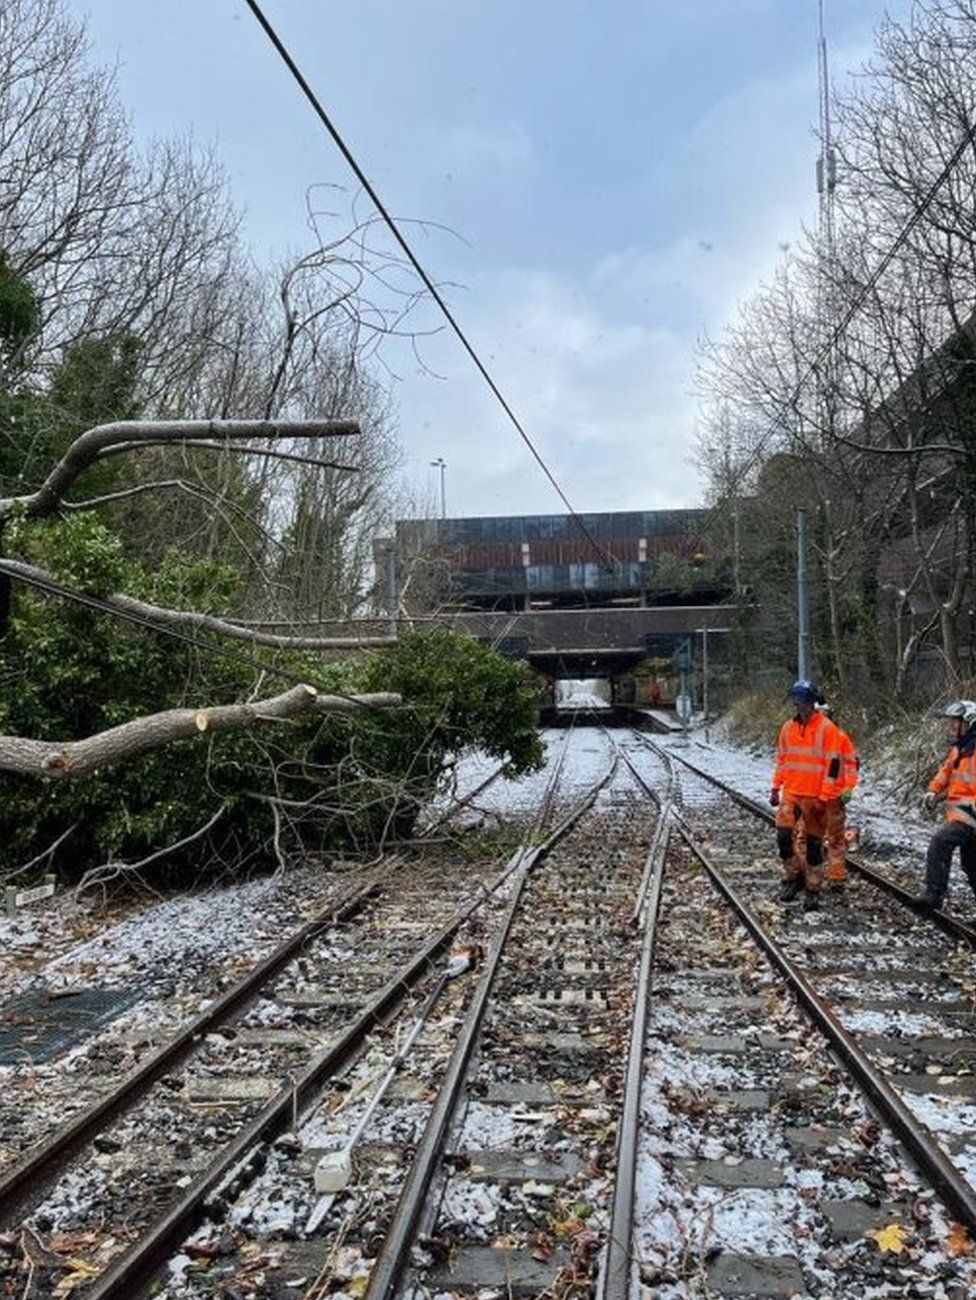 Engineers work to clear a large tree from a Metro line